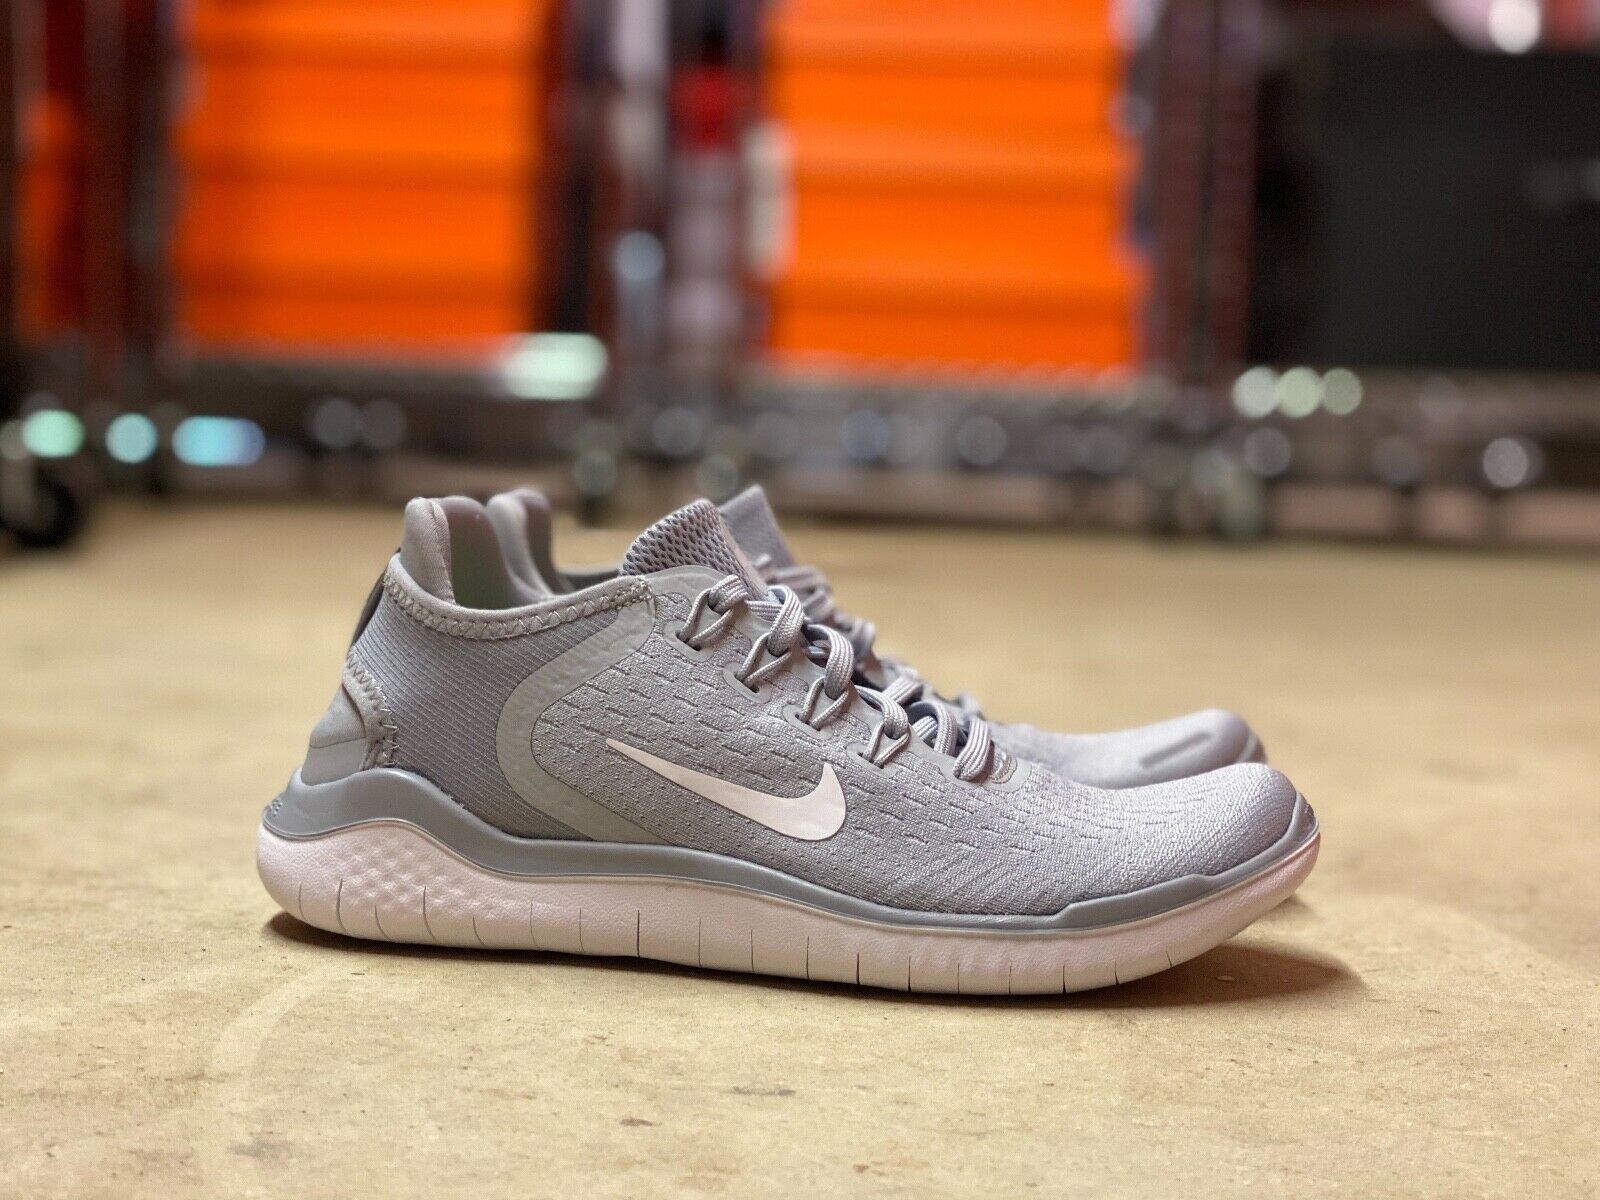 Primary image for Nike Free RN 2018 Low Womens Running Shoes Gray White (942837-003) NEW Multi Sz